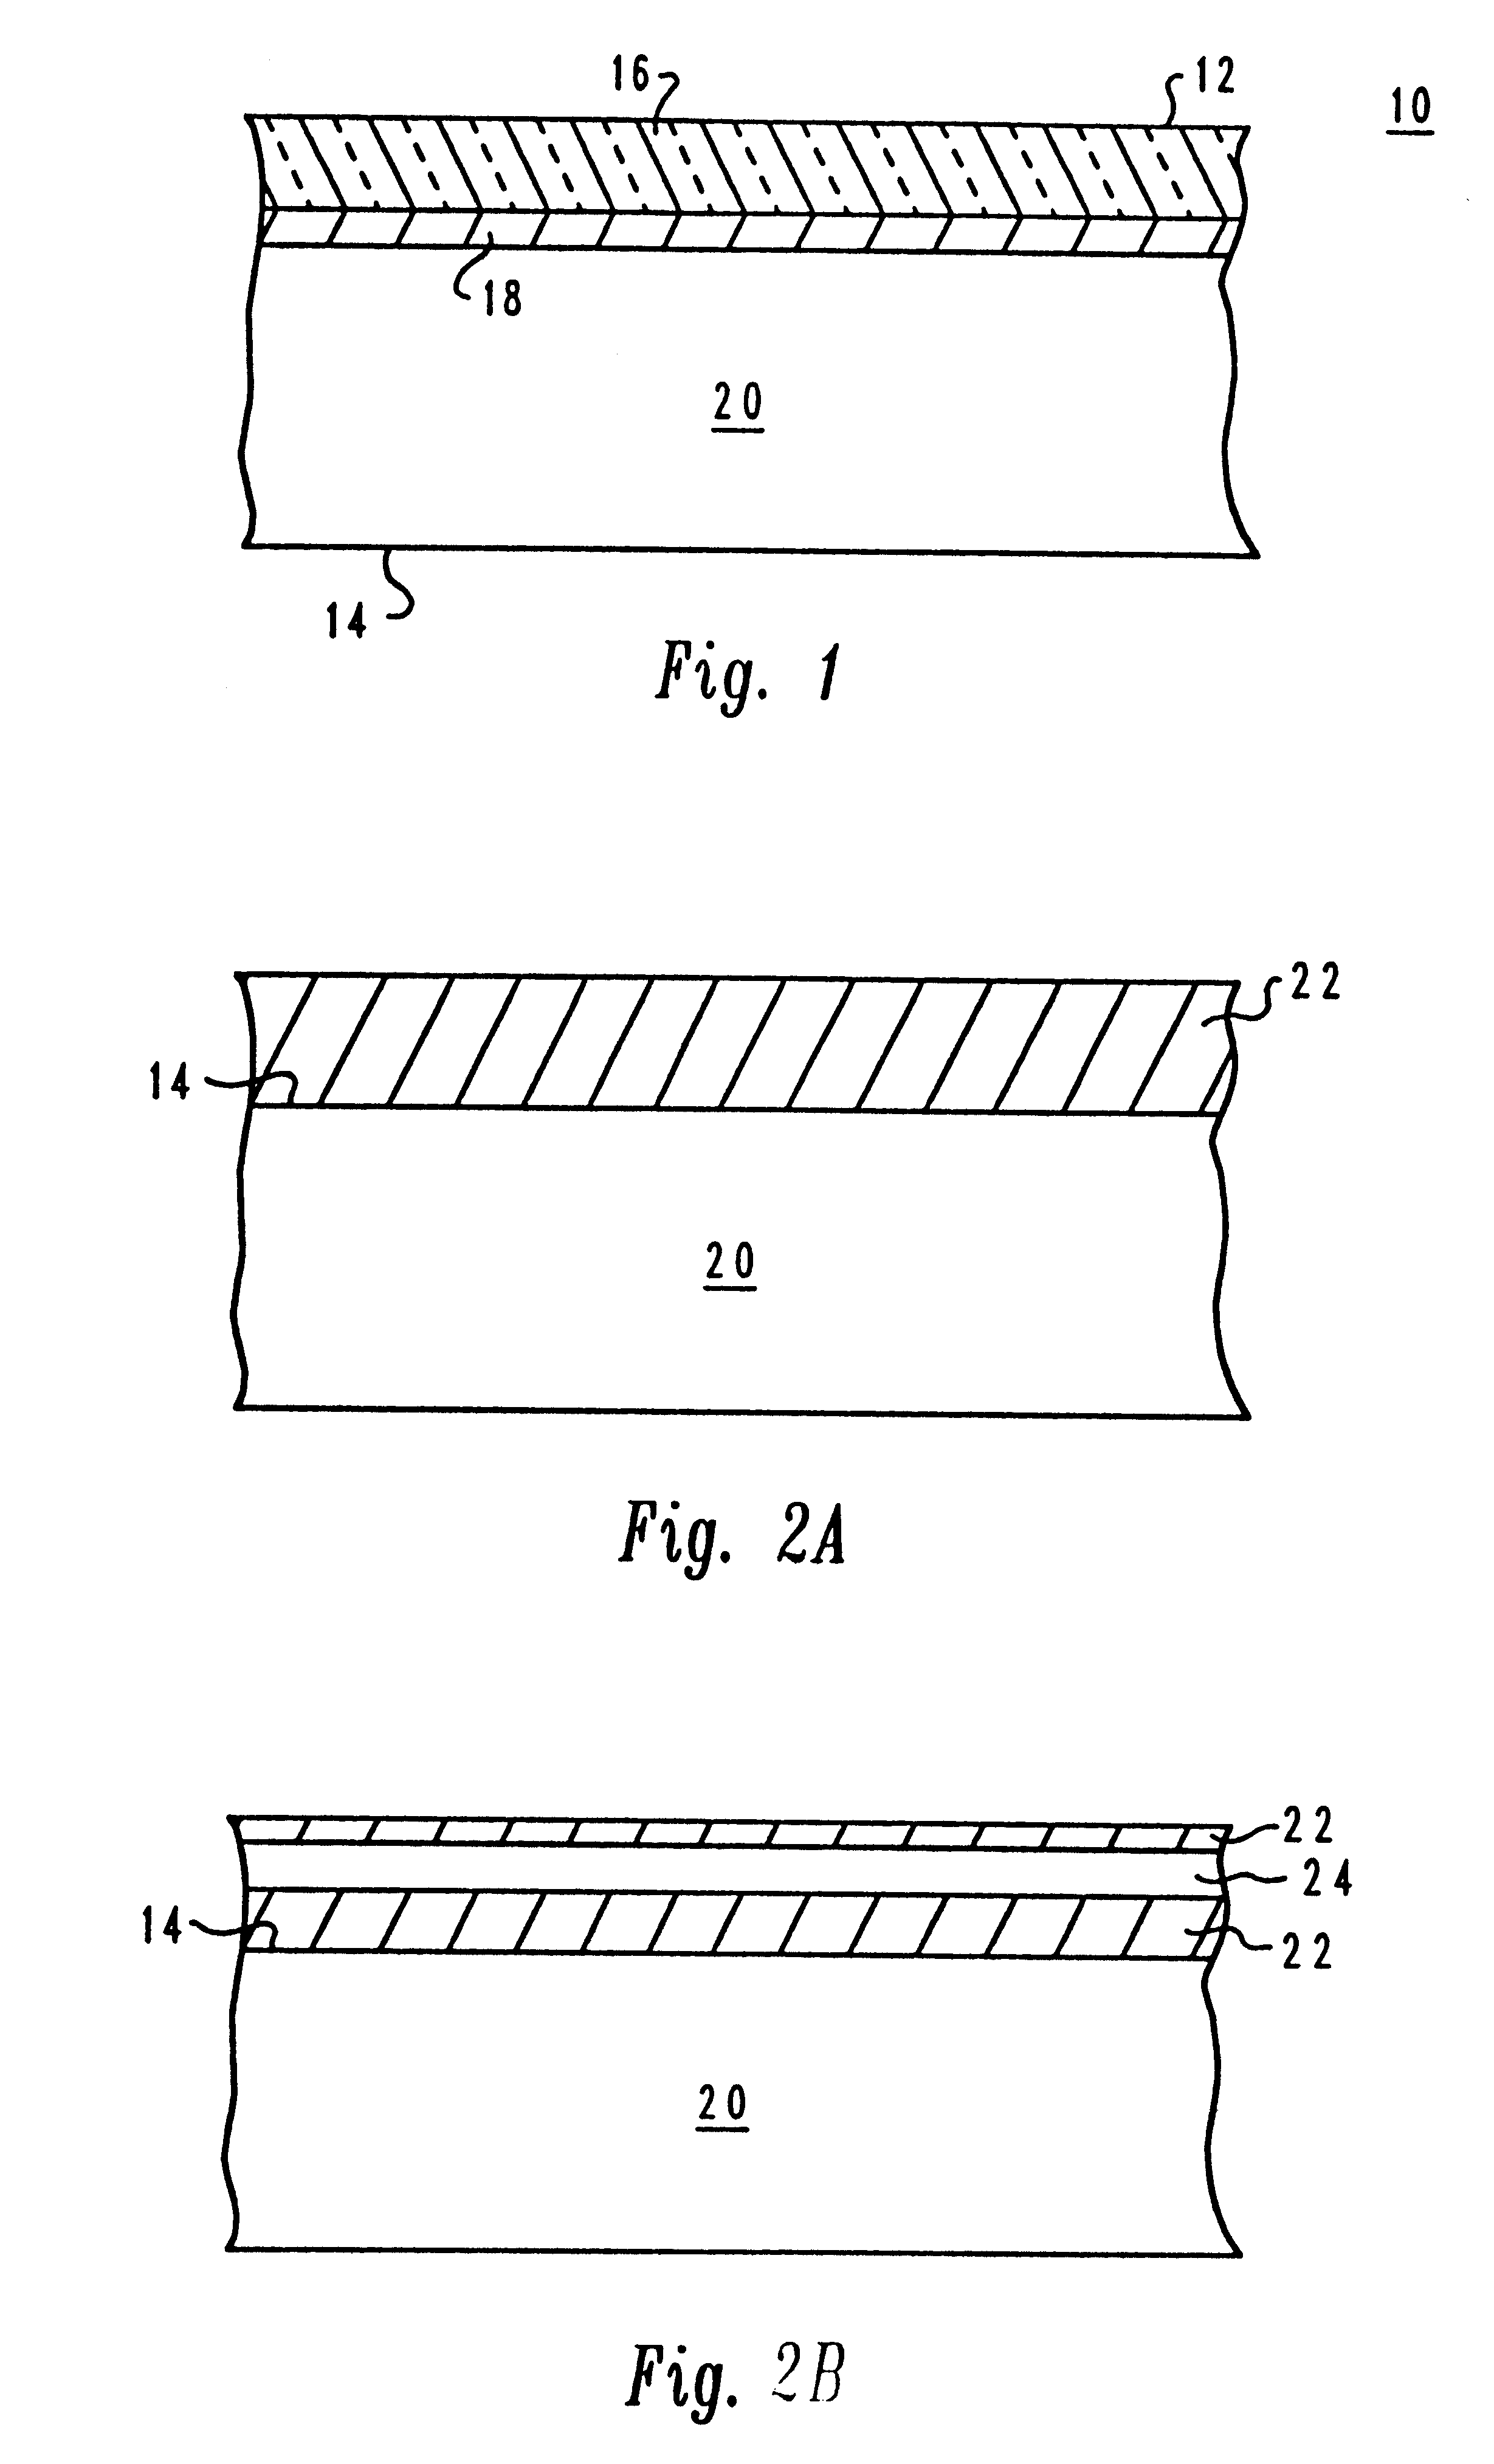 Silicon-on-insulator wafer having conductive layer for detection with electrical sensors